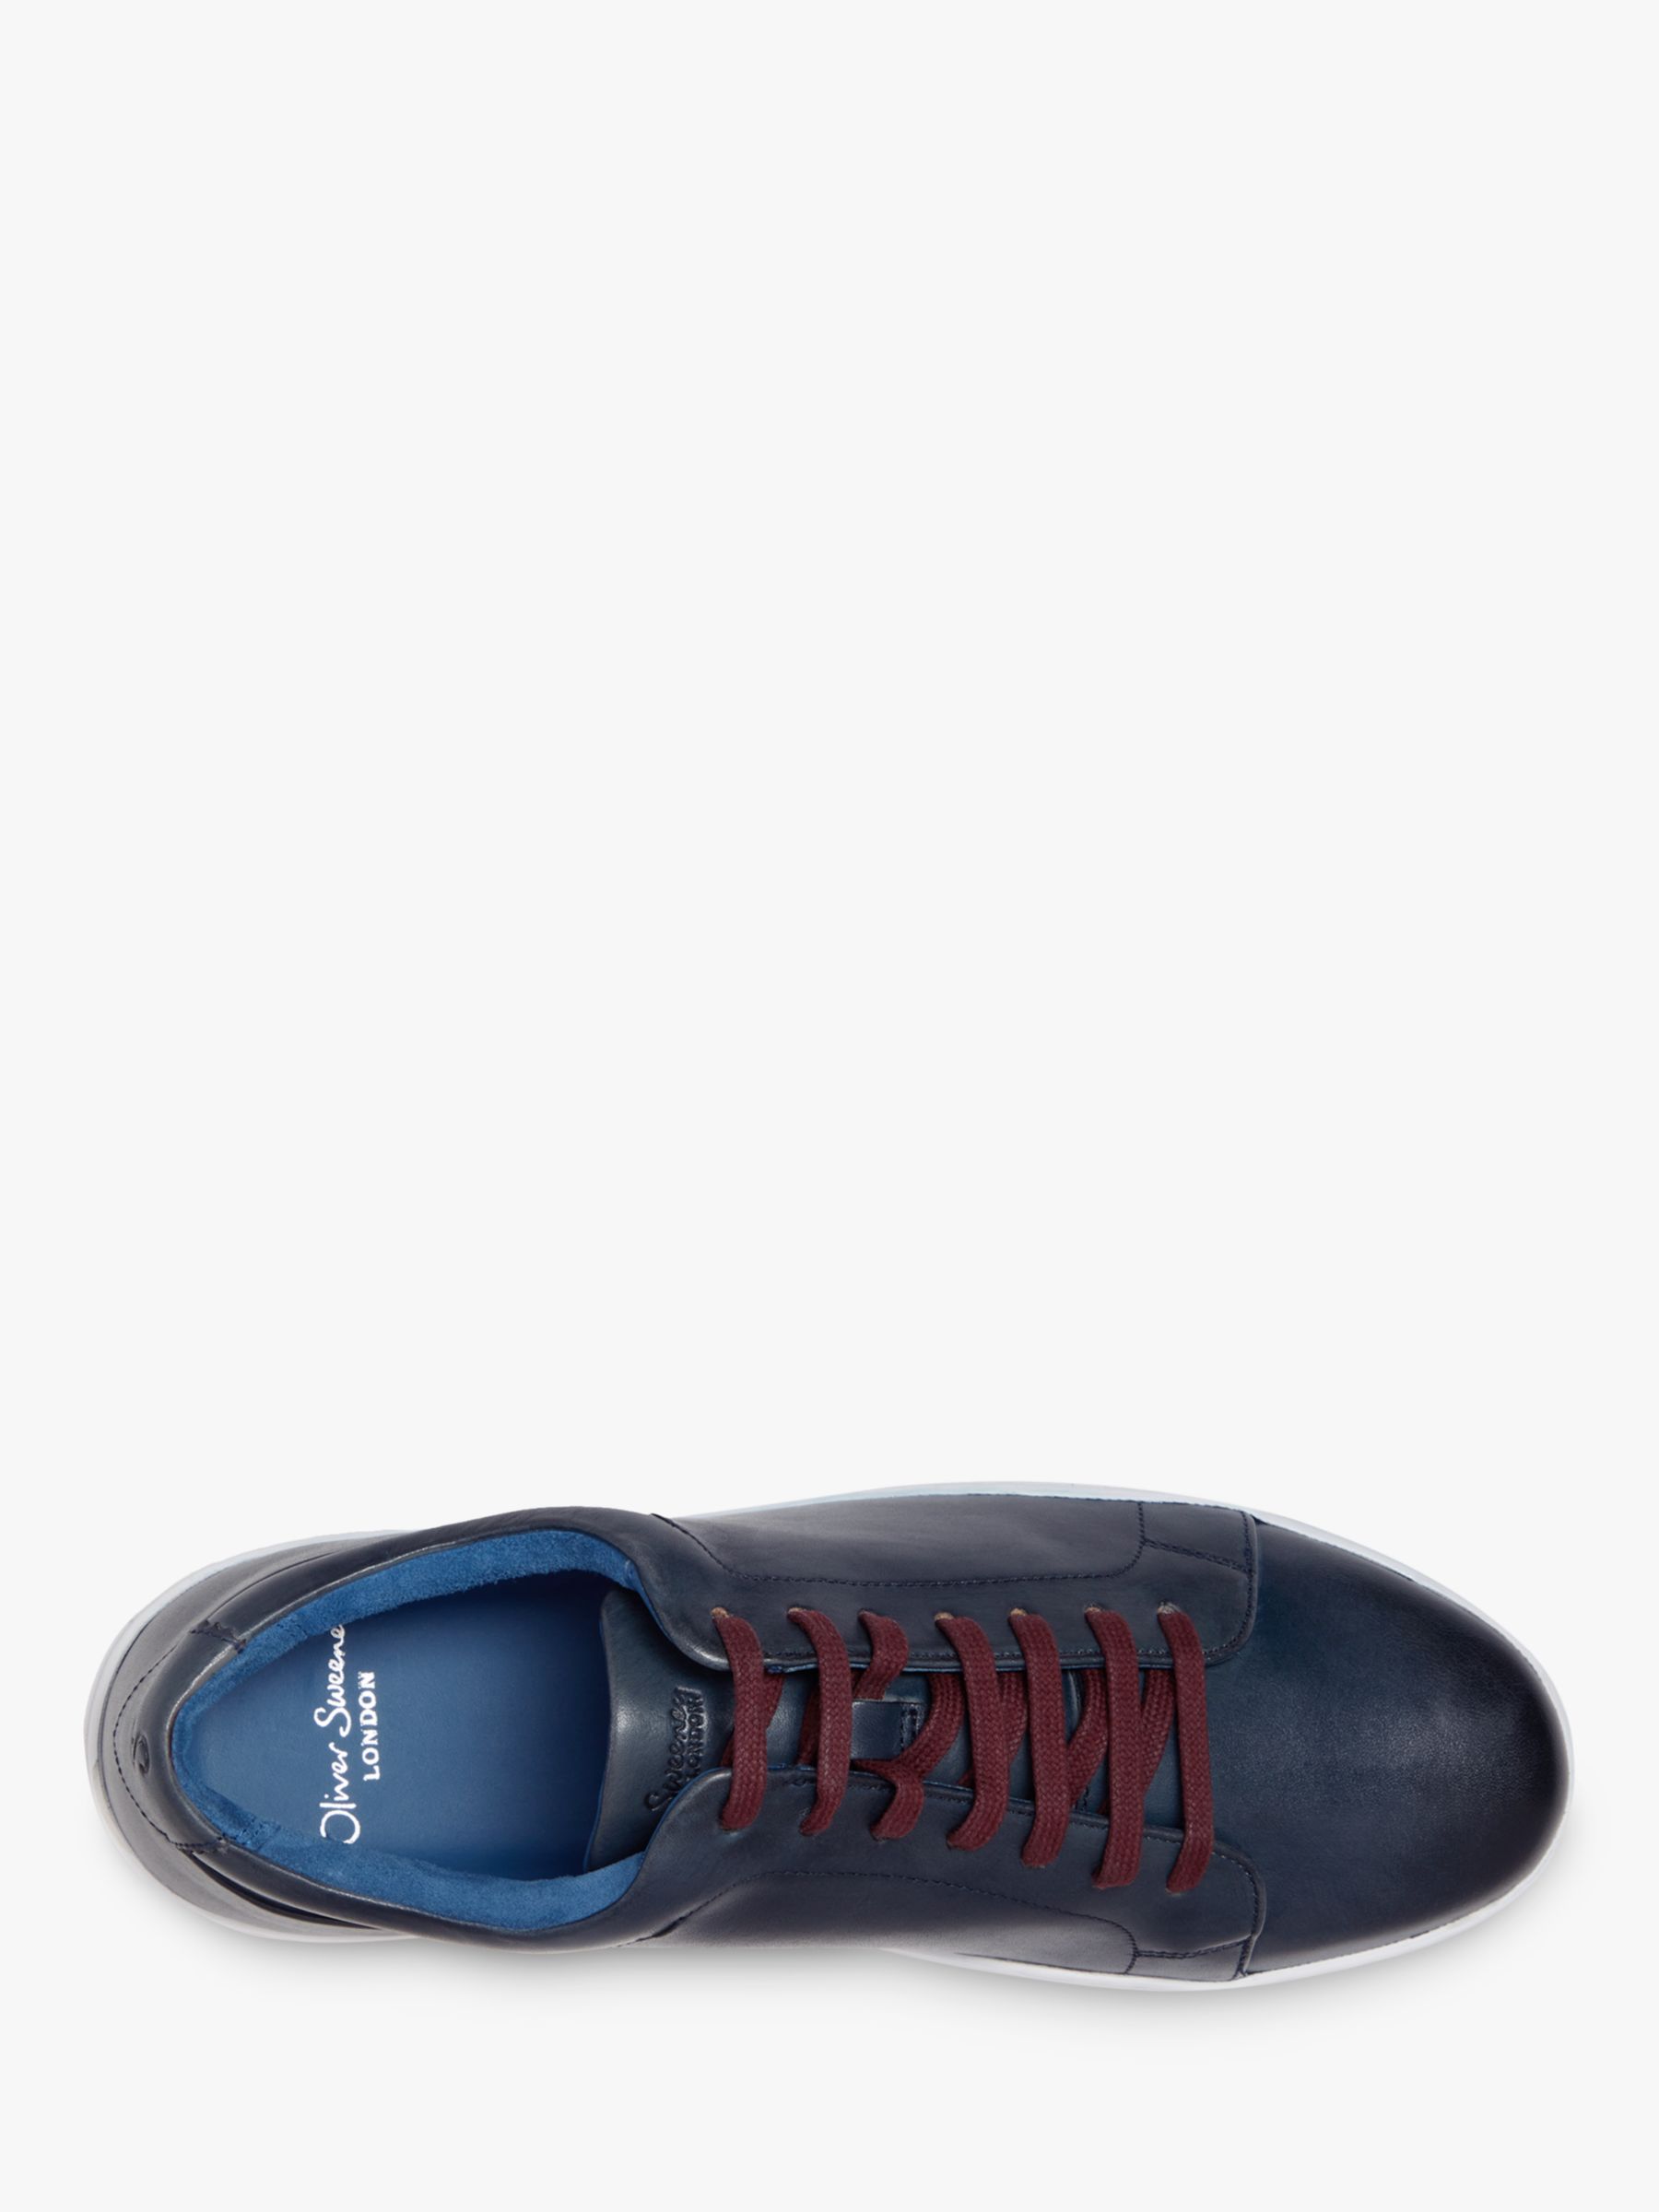 Oliver Sweeney Hayle Leather Trainers, Navy, 7